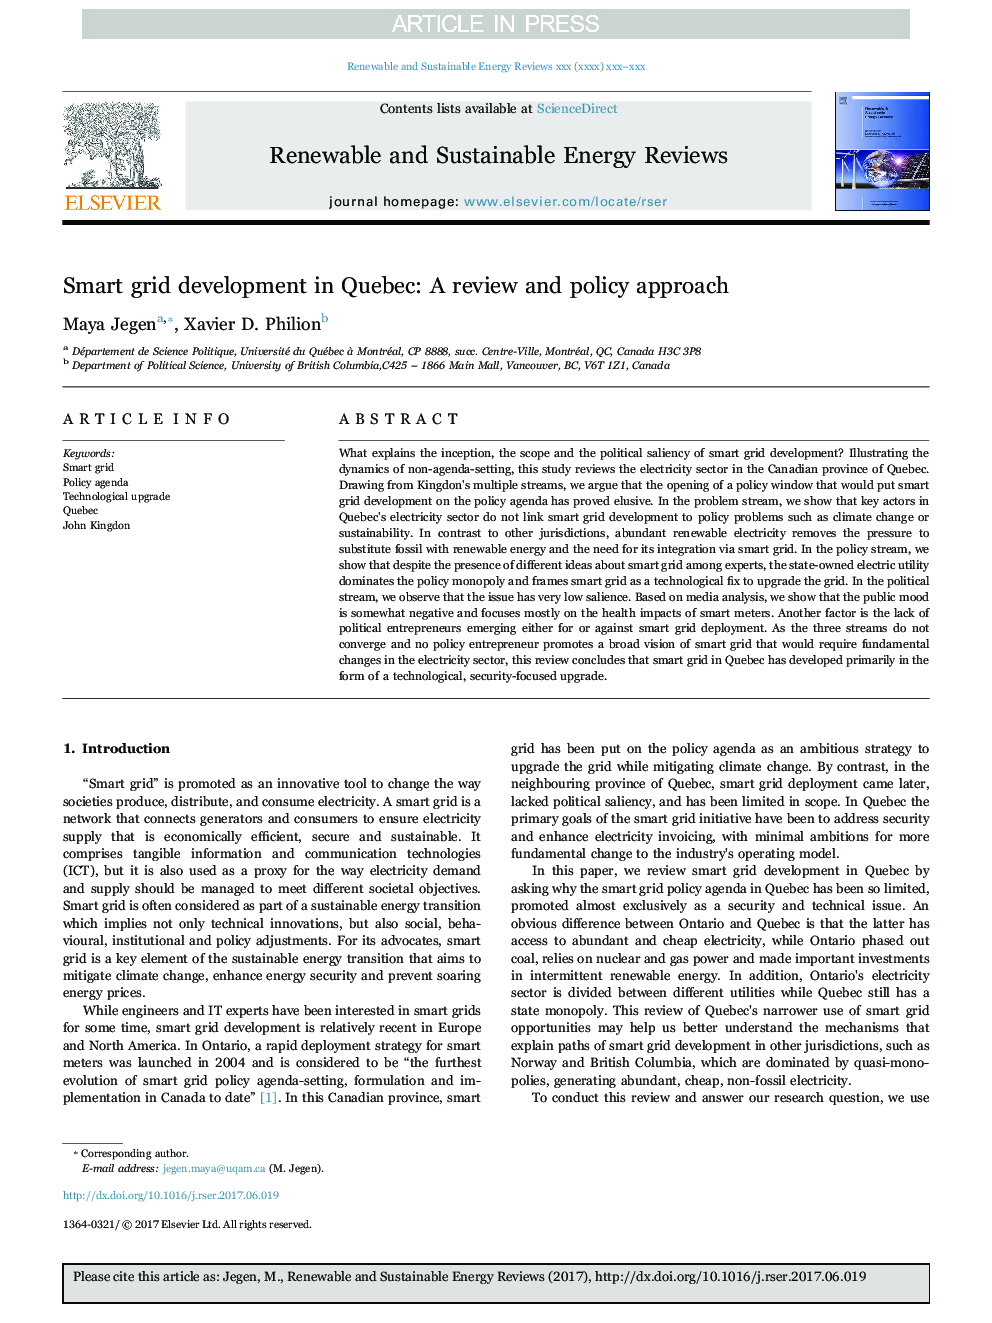 Smart grid development in Quebec: A review and policy approach